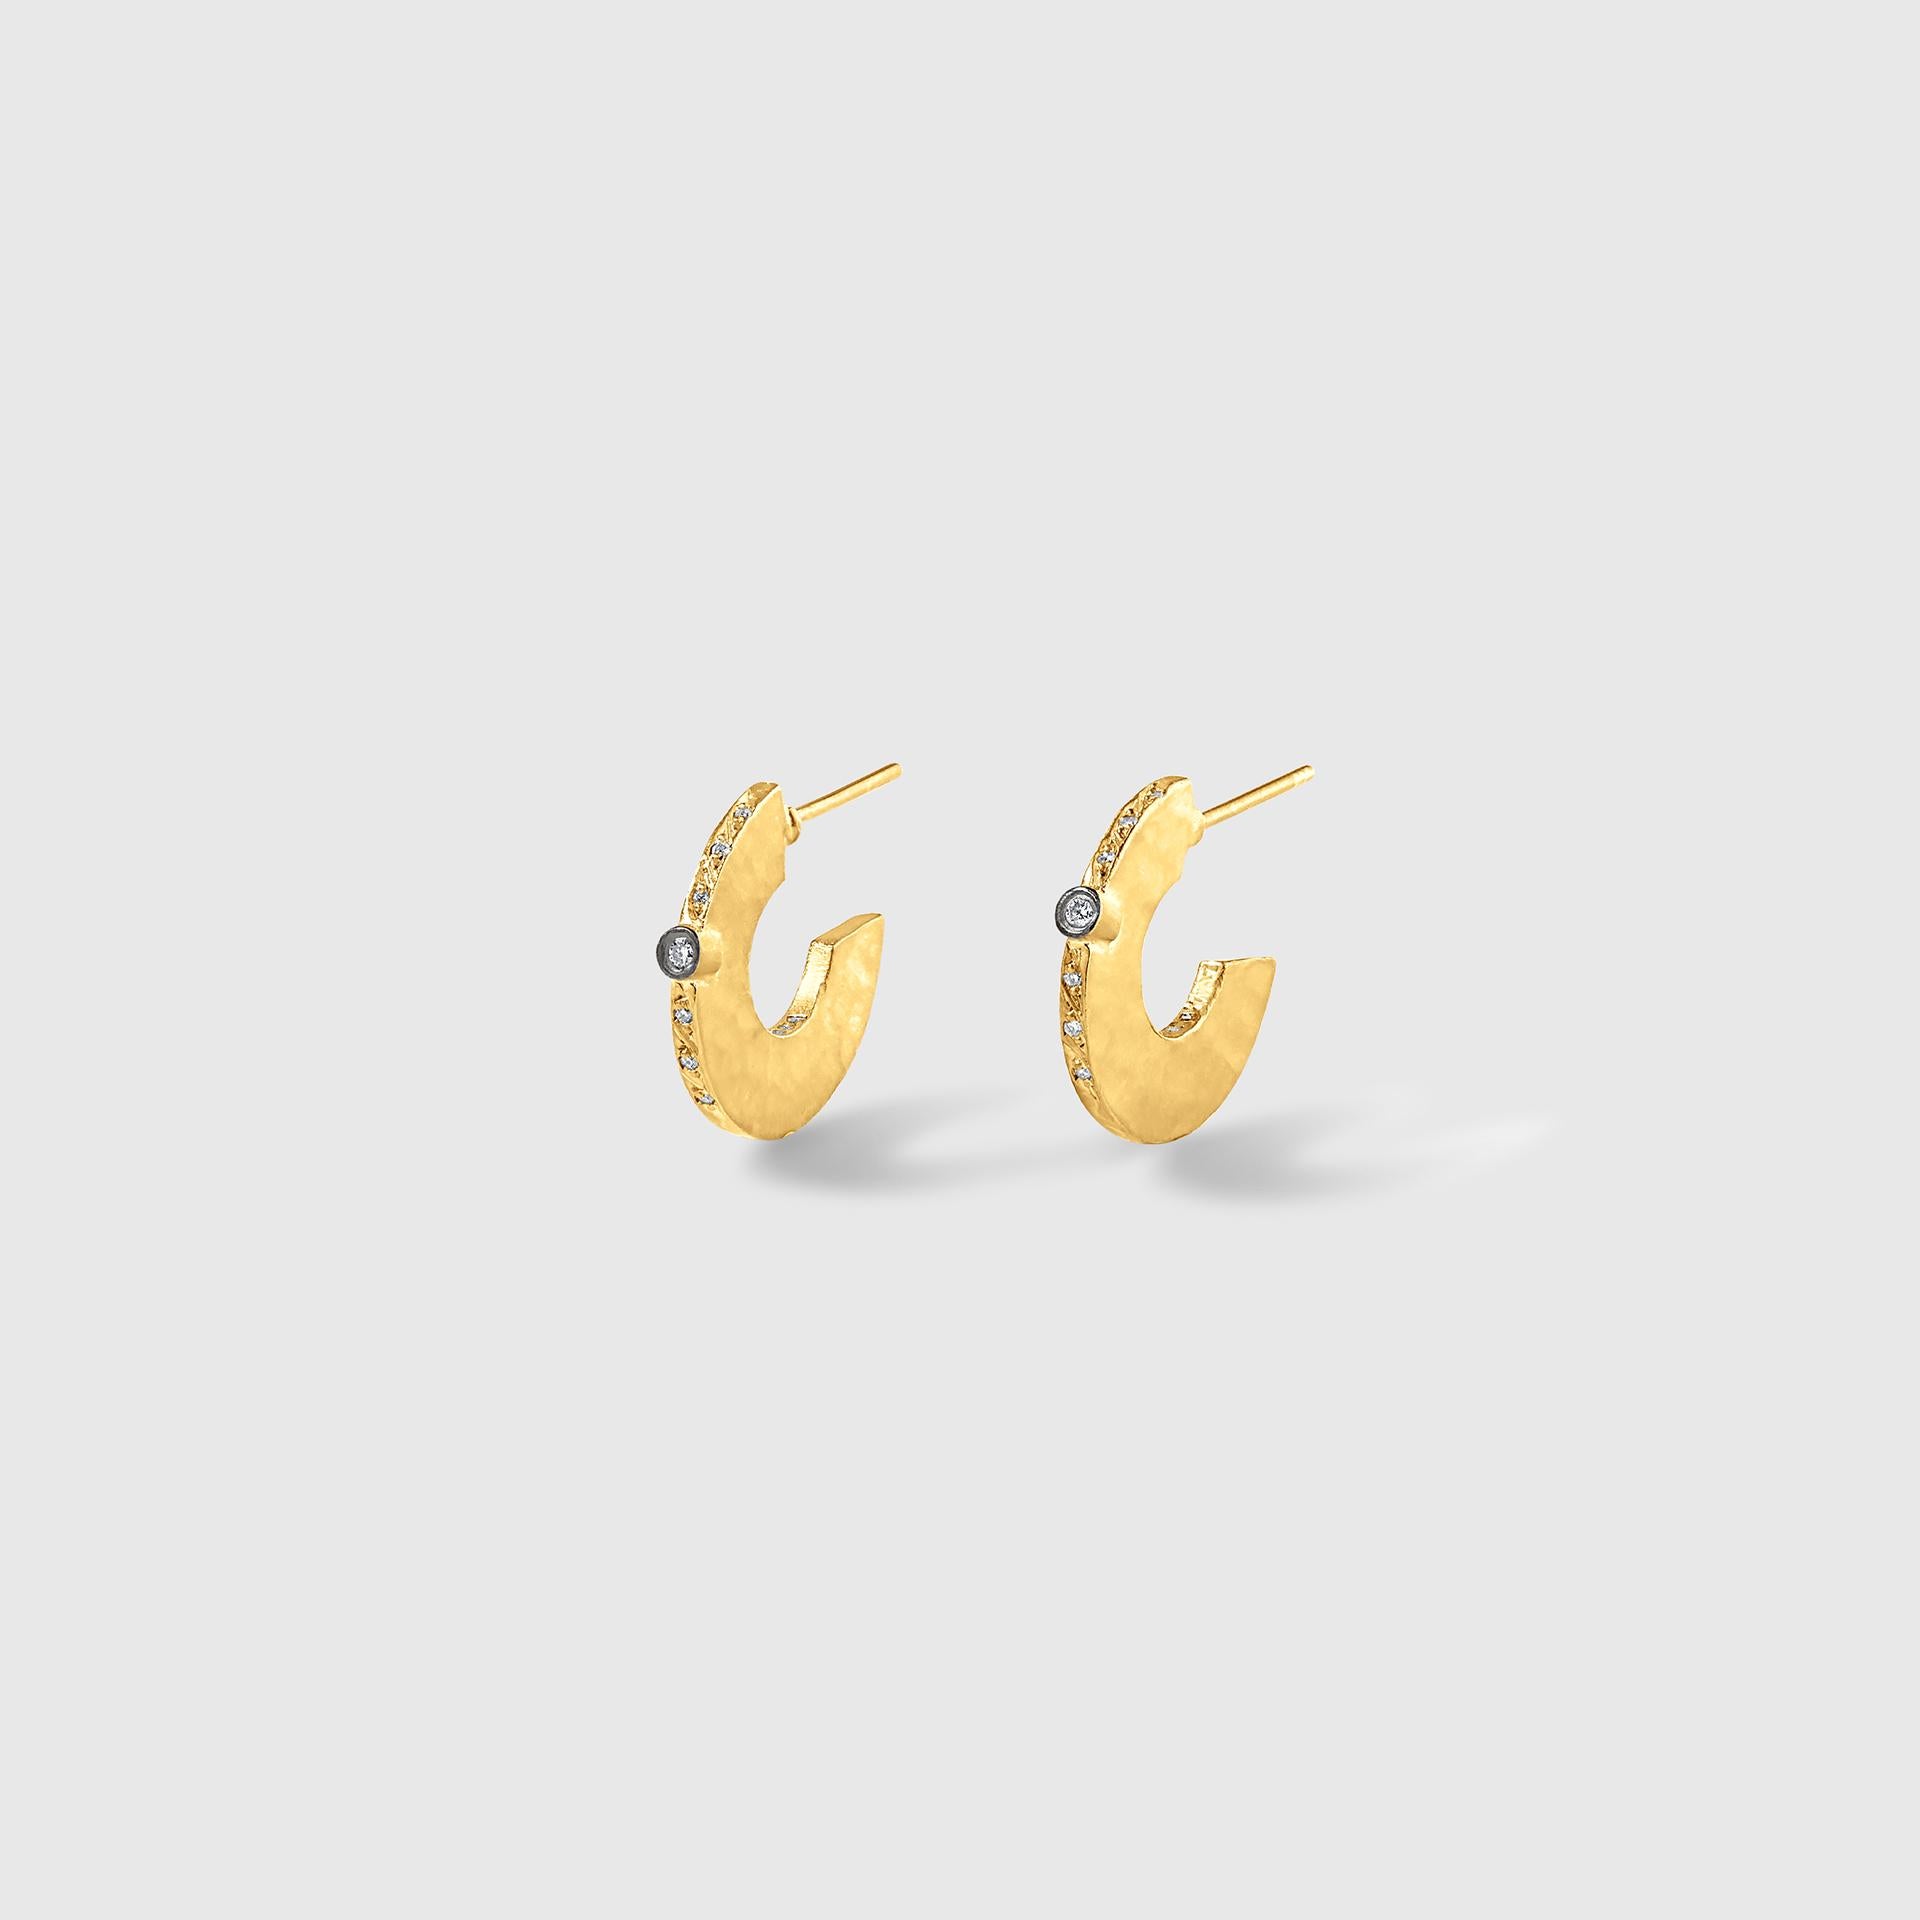 Gold Hoop Earrings with Diamond Detail, 24kt Yellow Gold and Silver, Size Small, Length: 3/4